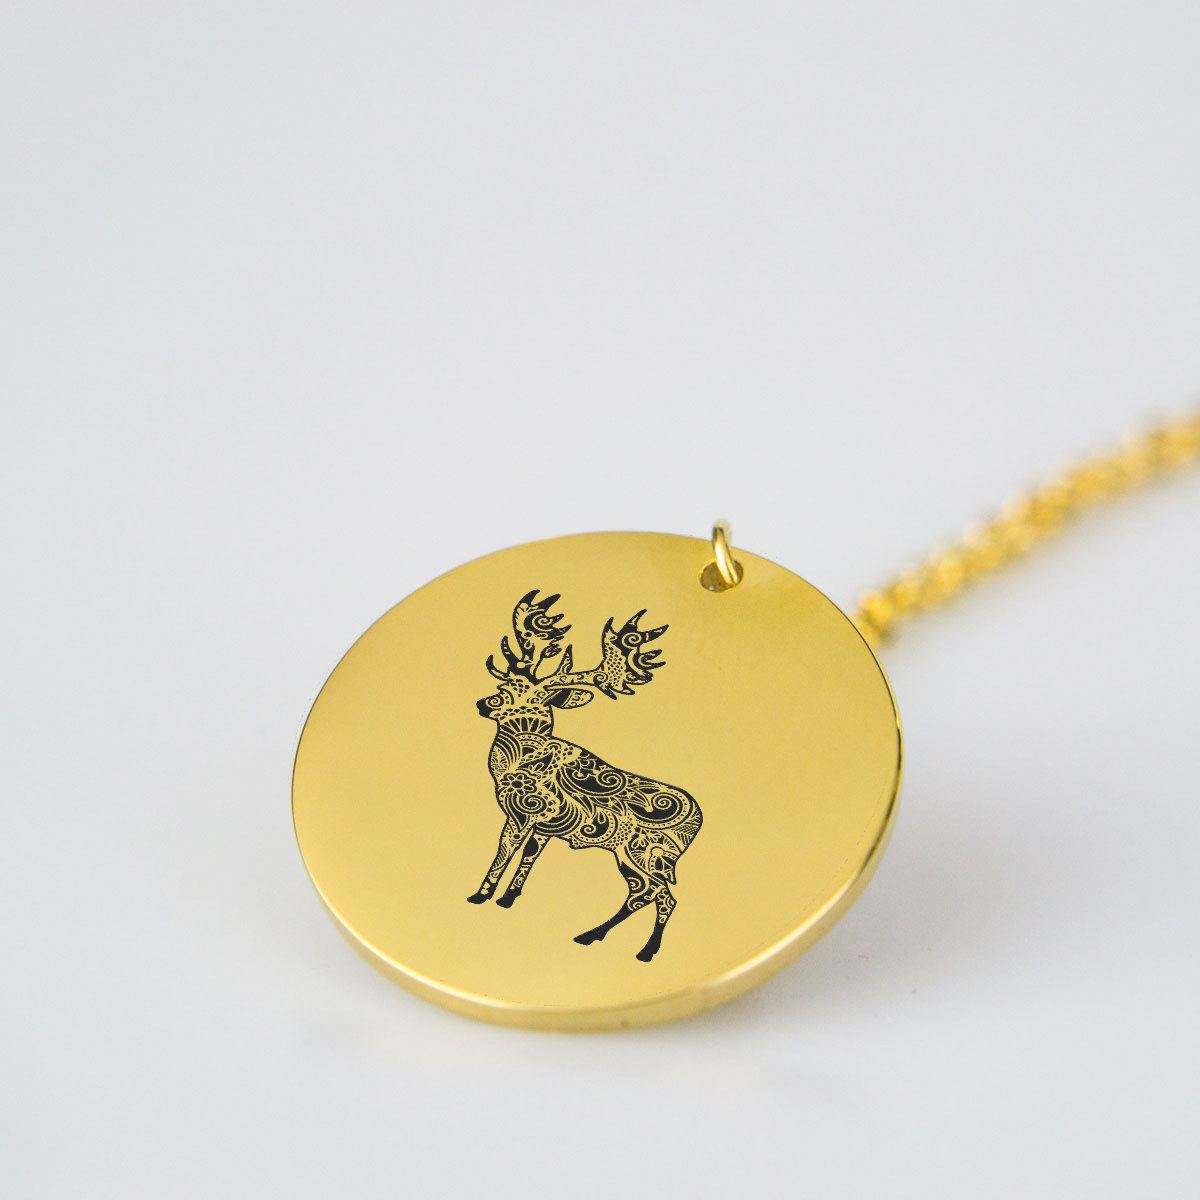 Deer Silhouette Charm Necklace